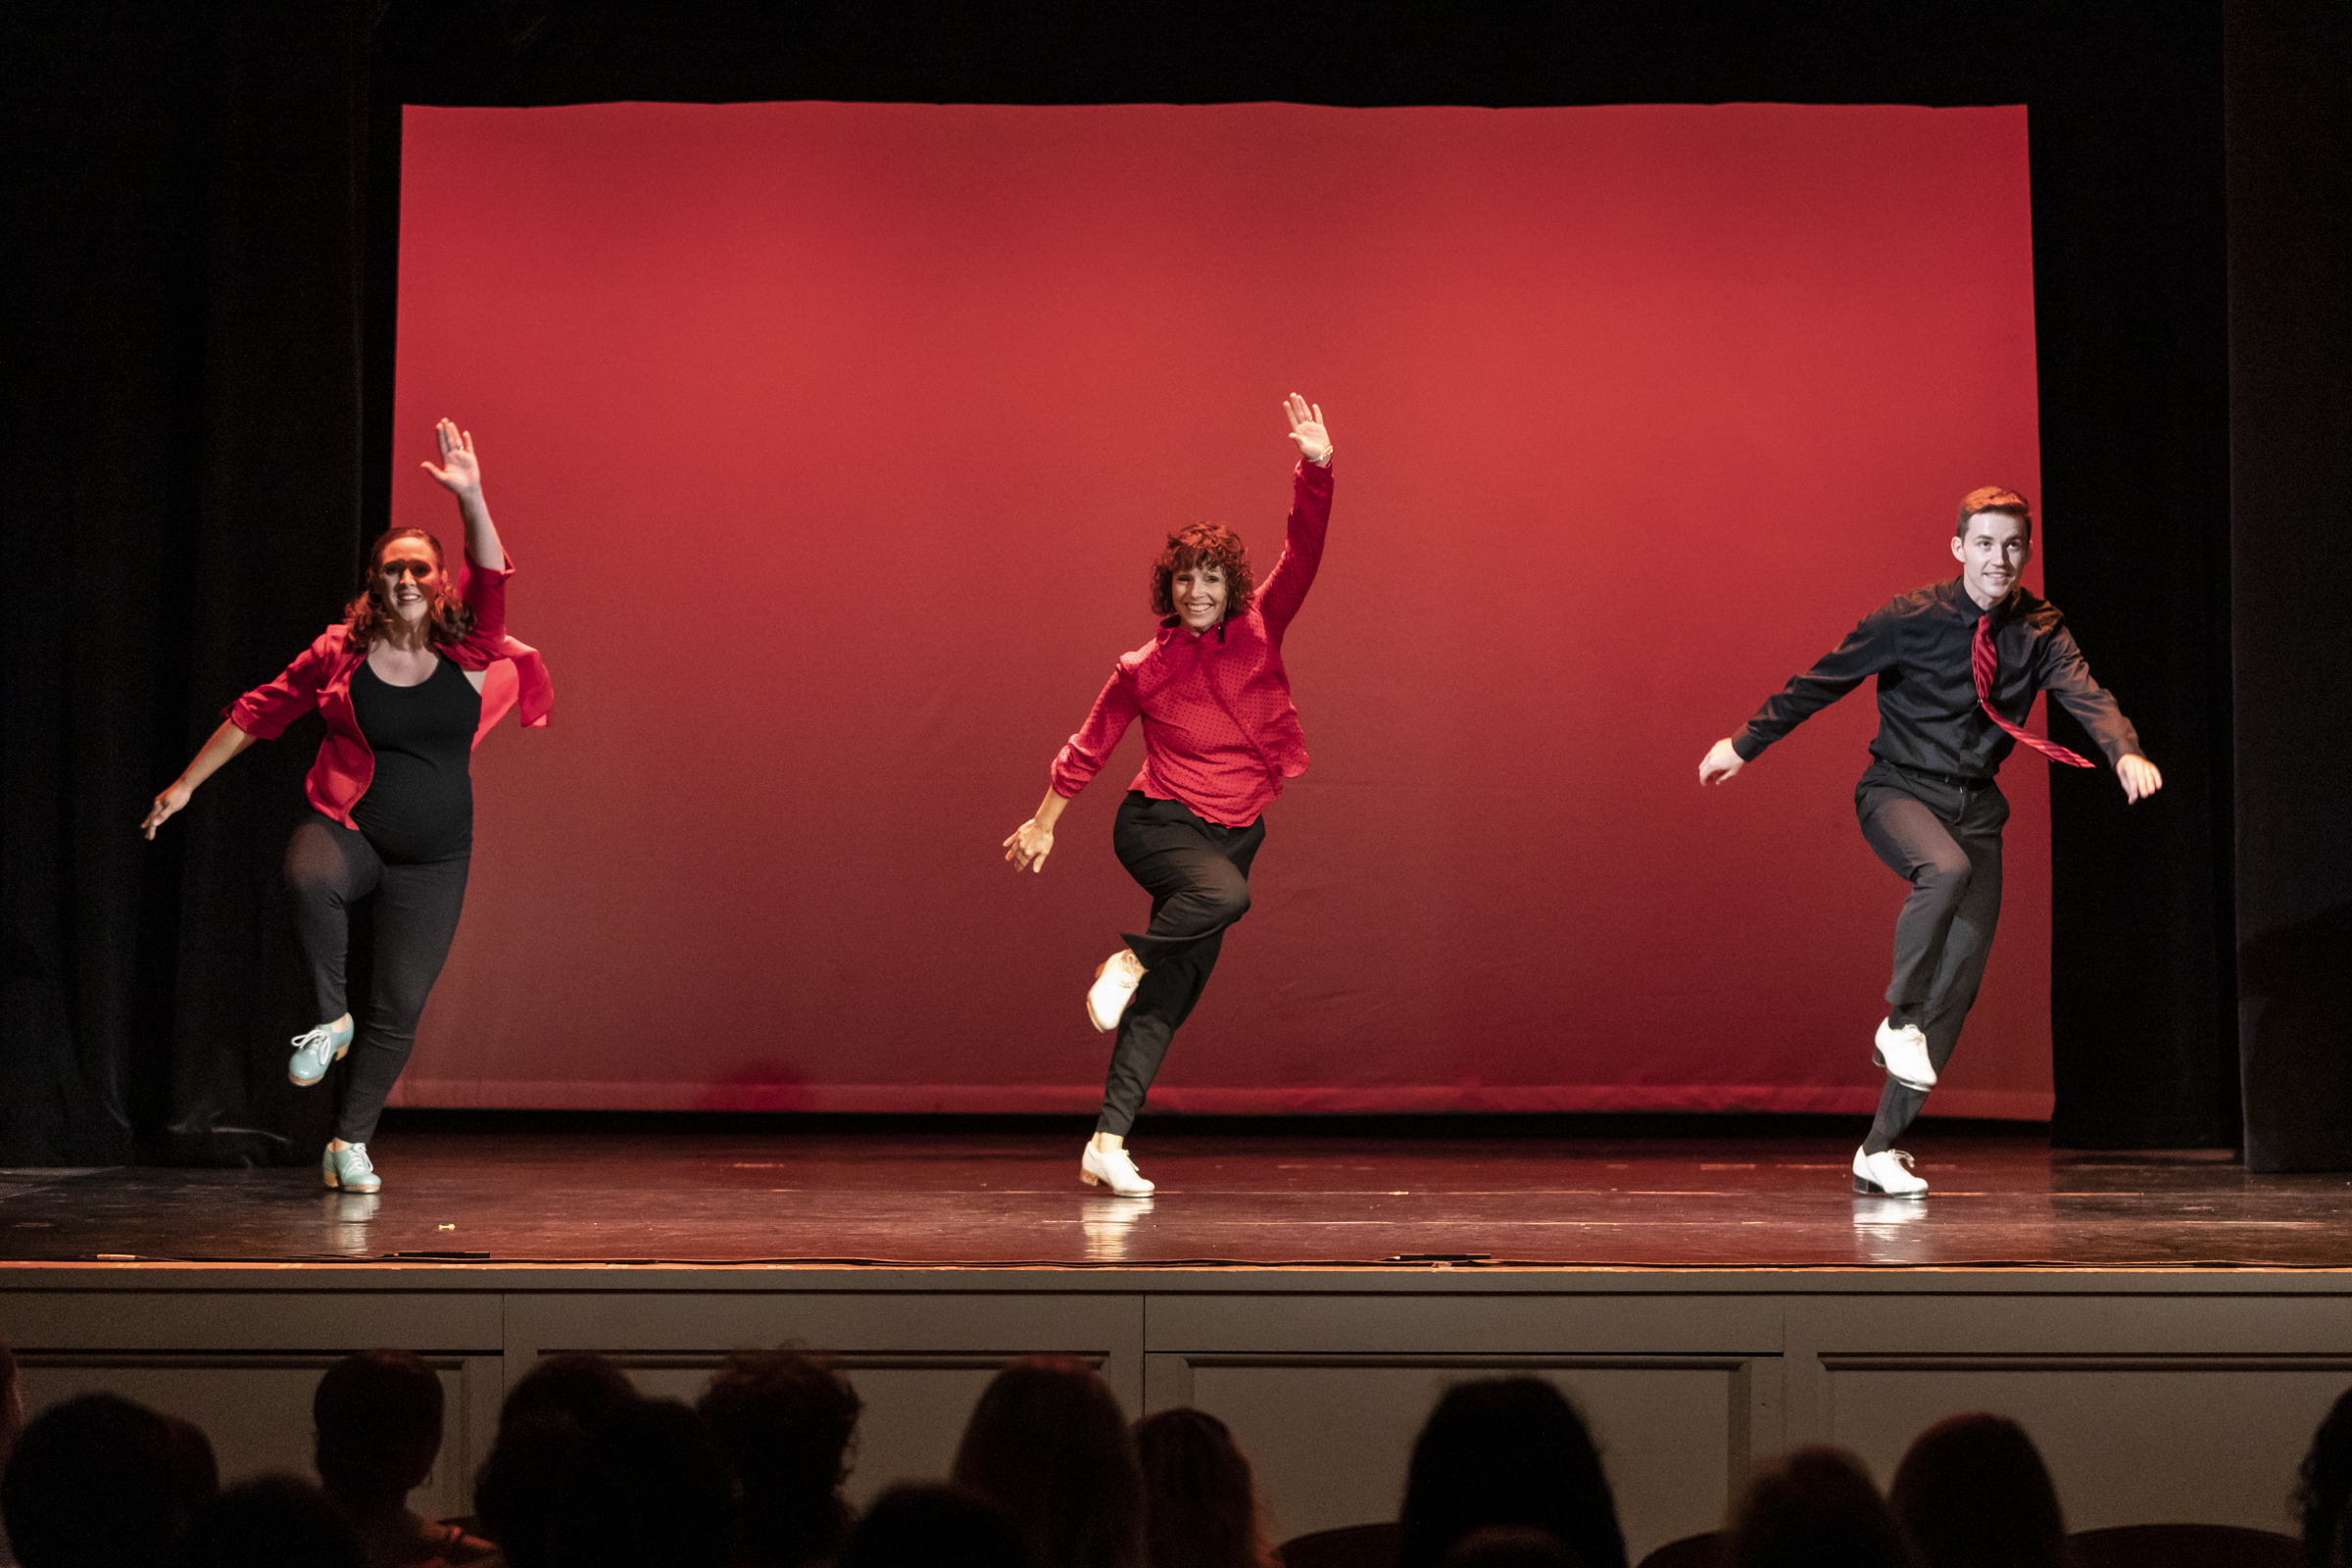 From left: Kelly Ging, Maria Majors, and Tommy Wasiuta of STL Collaborative perform a trio tap dance in black and red costumes.